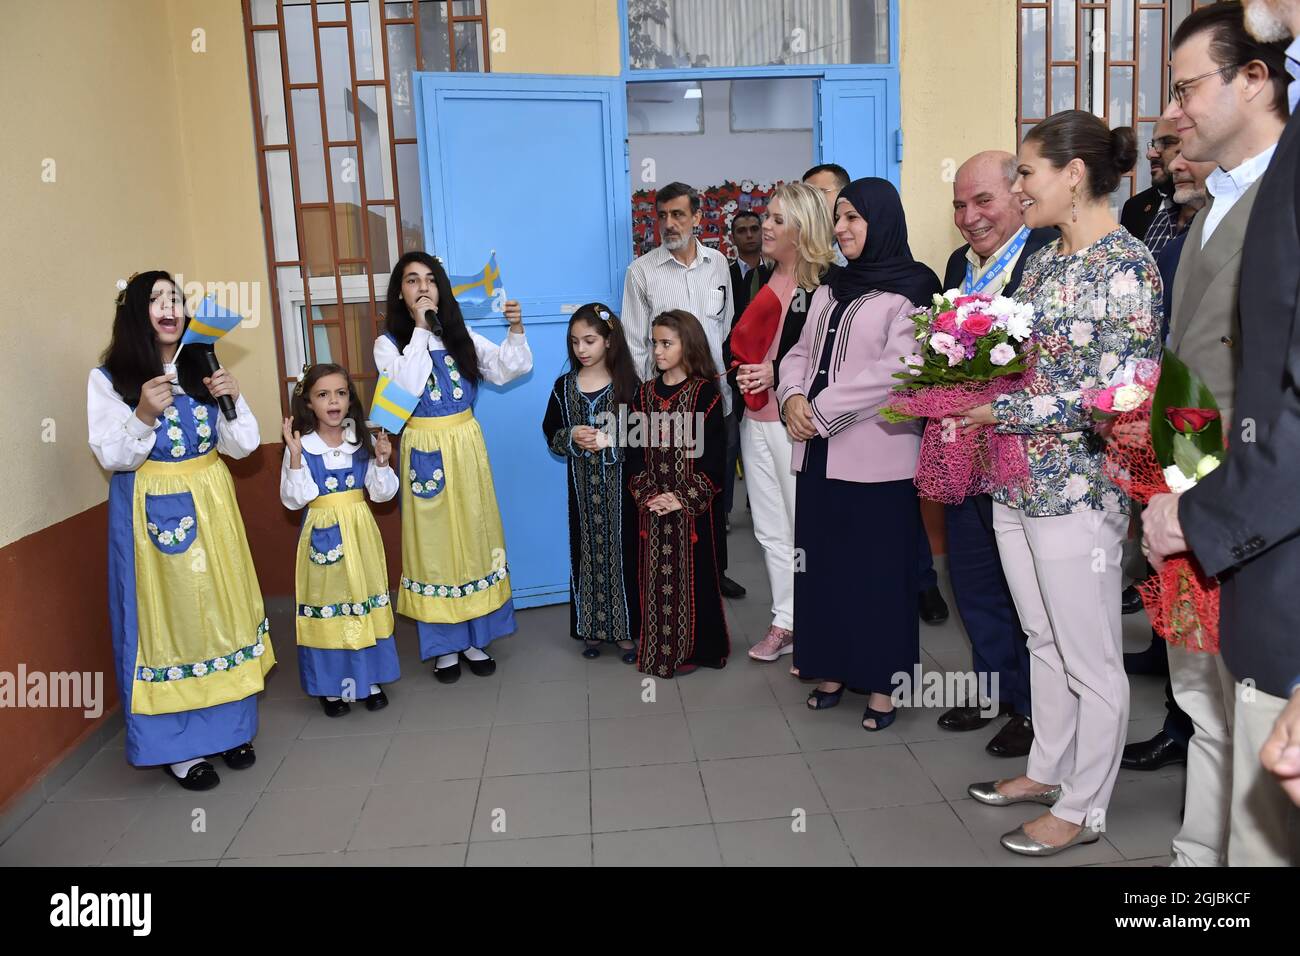 BEIRUT 20181018 Swedish Crown Princess Victoria, Prince Daniel and Minister Lena Hallengren during a visit to a girl school in Beirut, Lebanon on Thursday The students performed the national anthem of Sweden. The Crown Princess couple is on a five-day visit to Jordan and Libanon. Photo: Jonas Ekstromer / TT / code 10030  Stock Photo